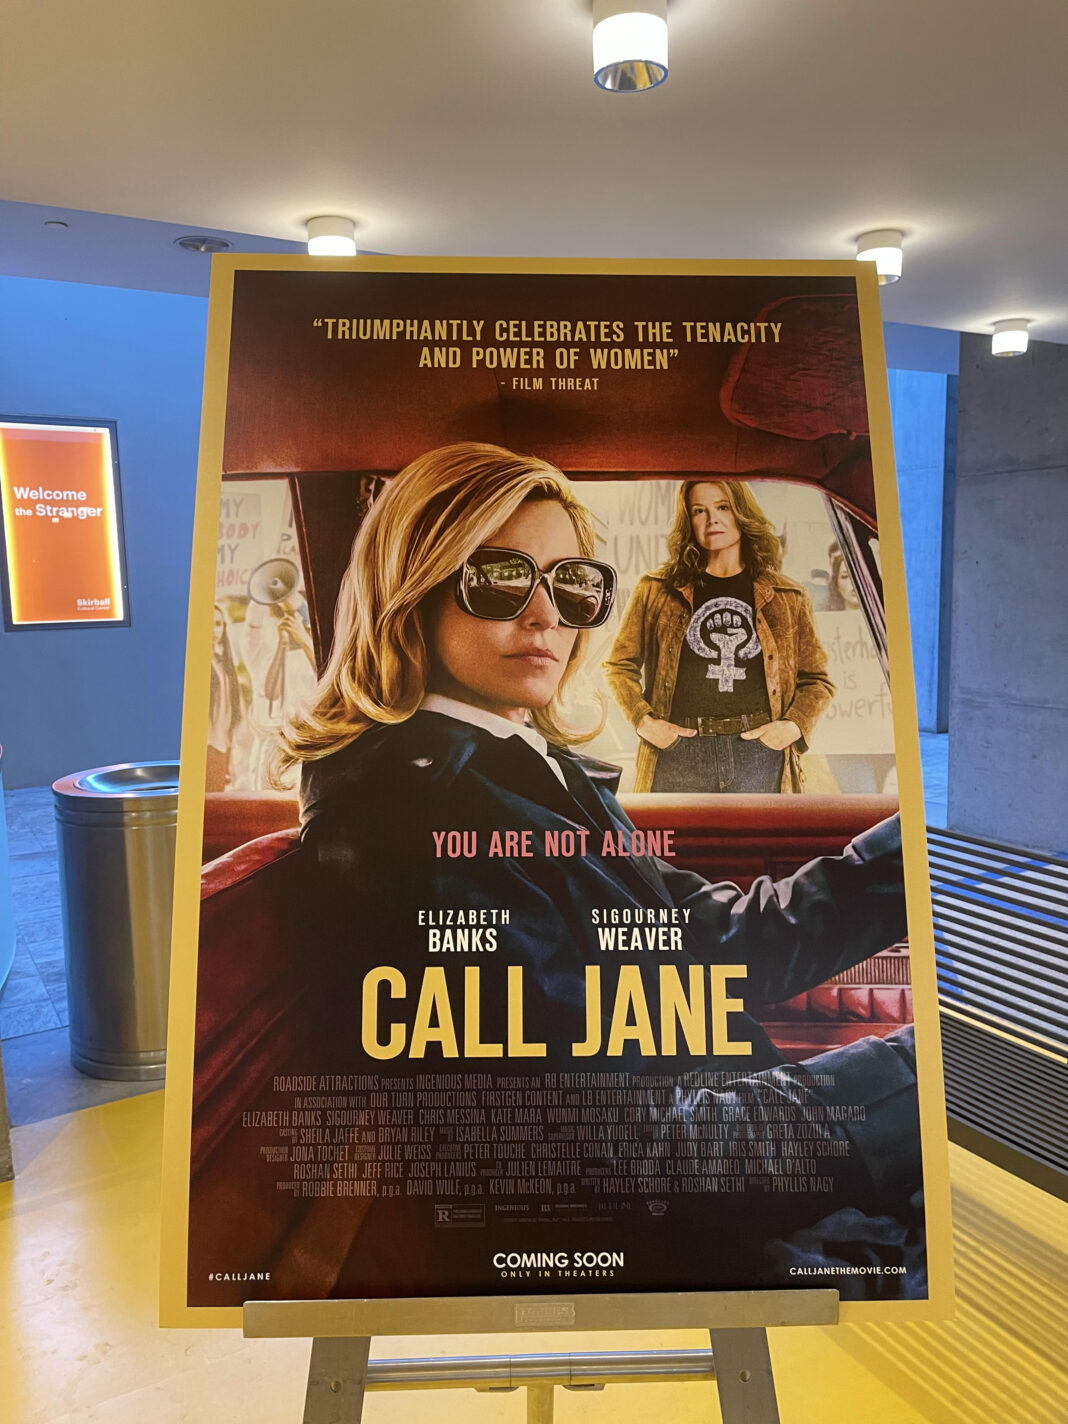 Powerful, moving message conveyed on 'Call Jane' premiere night